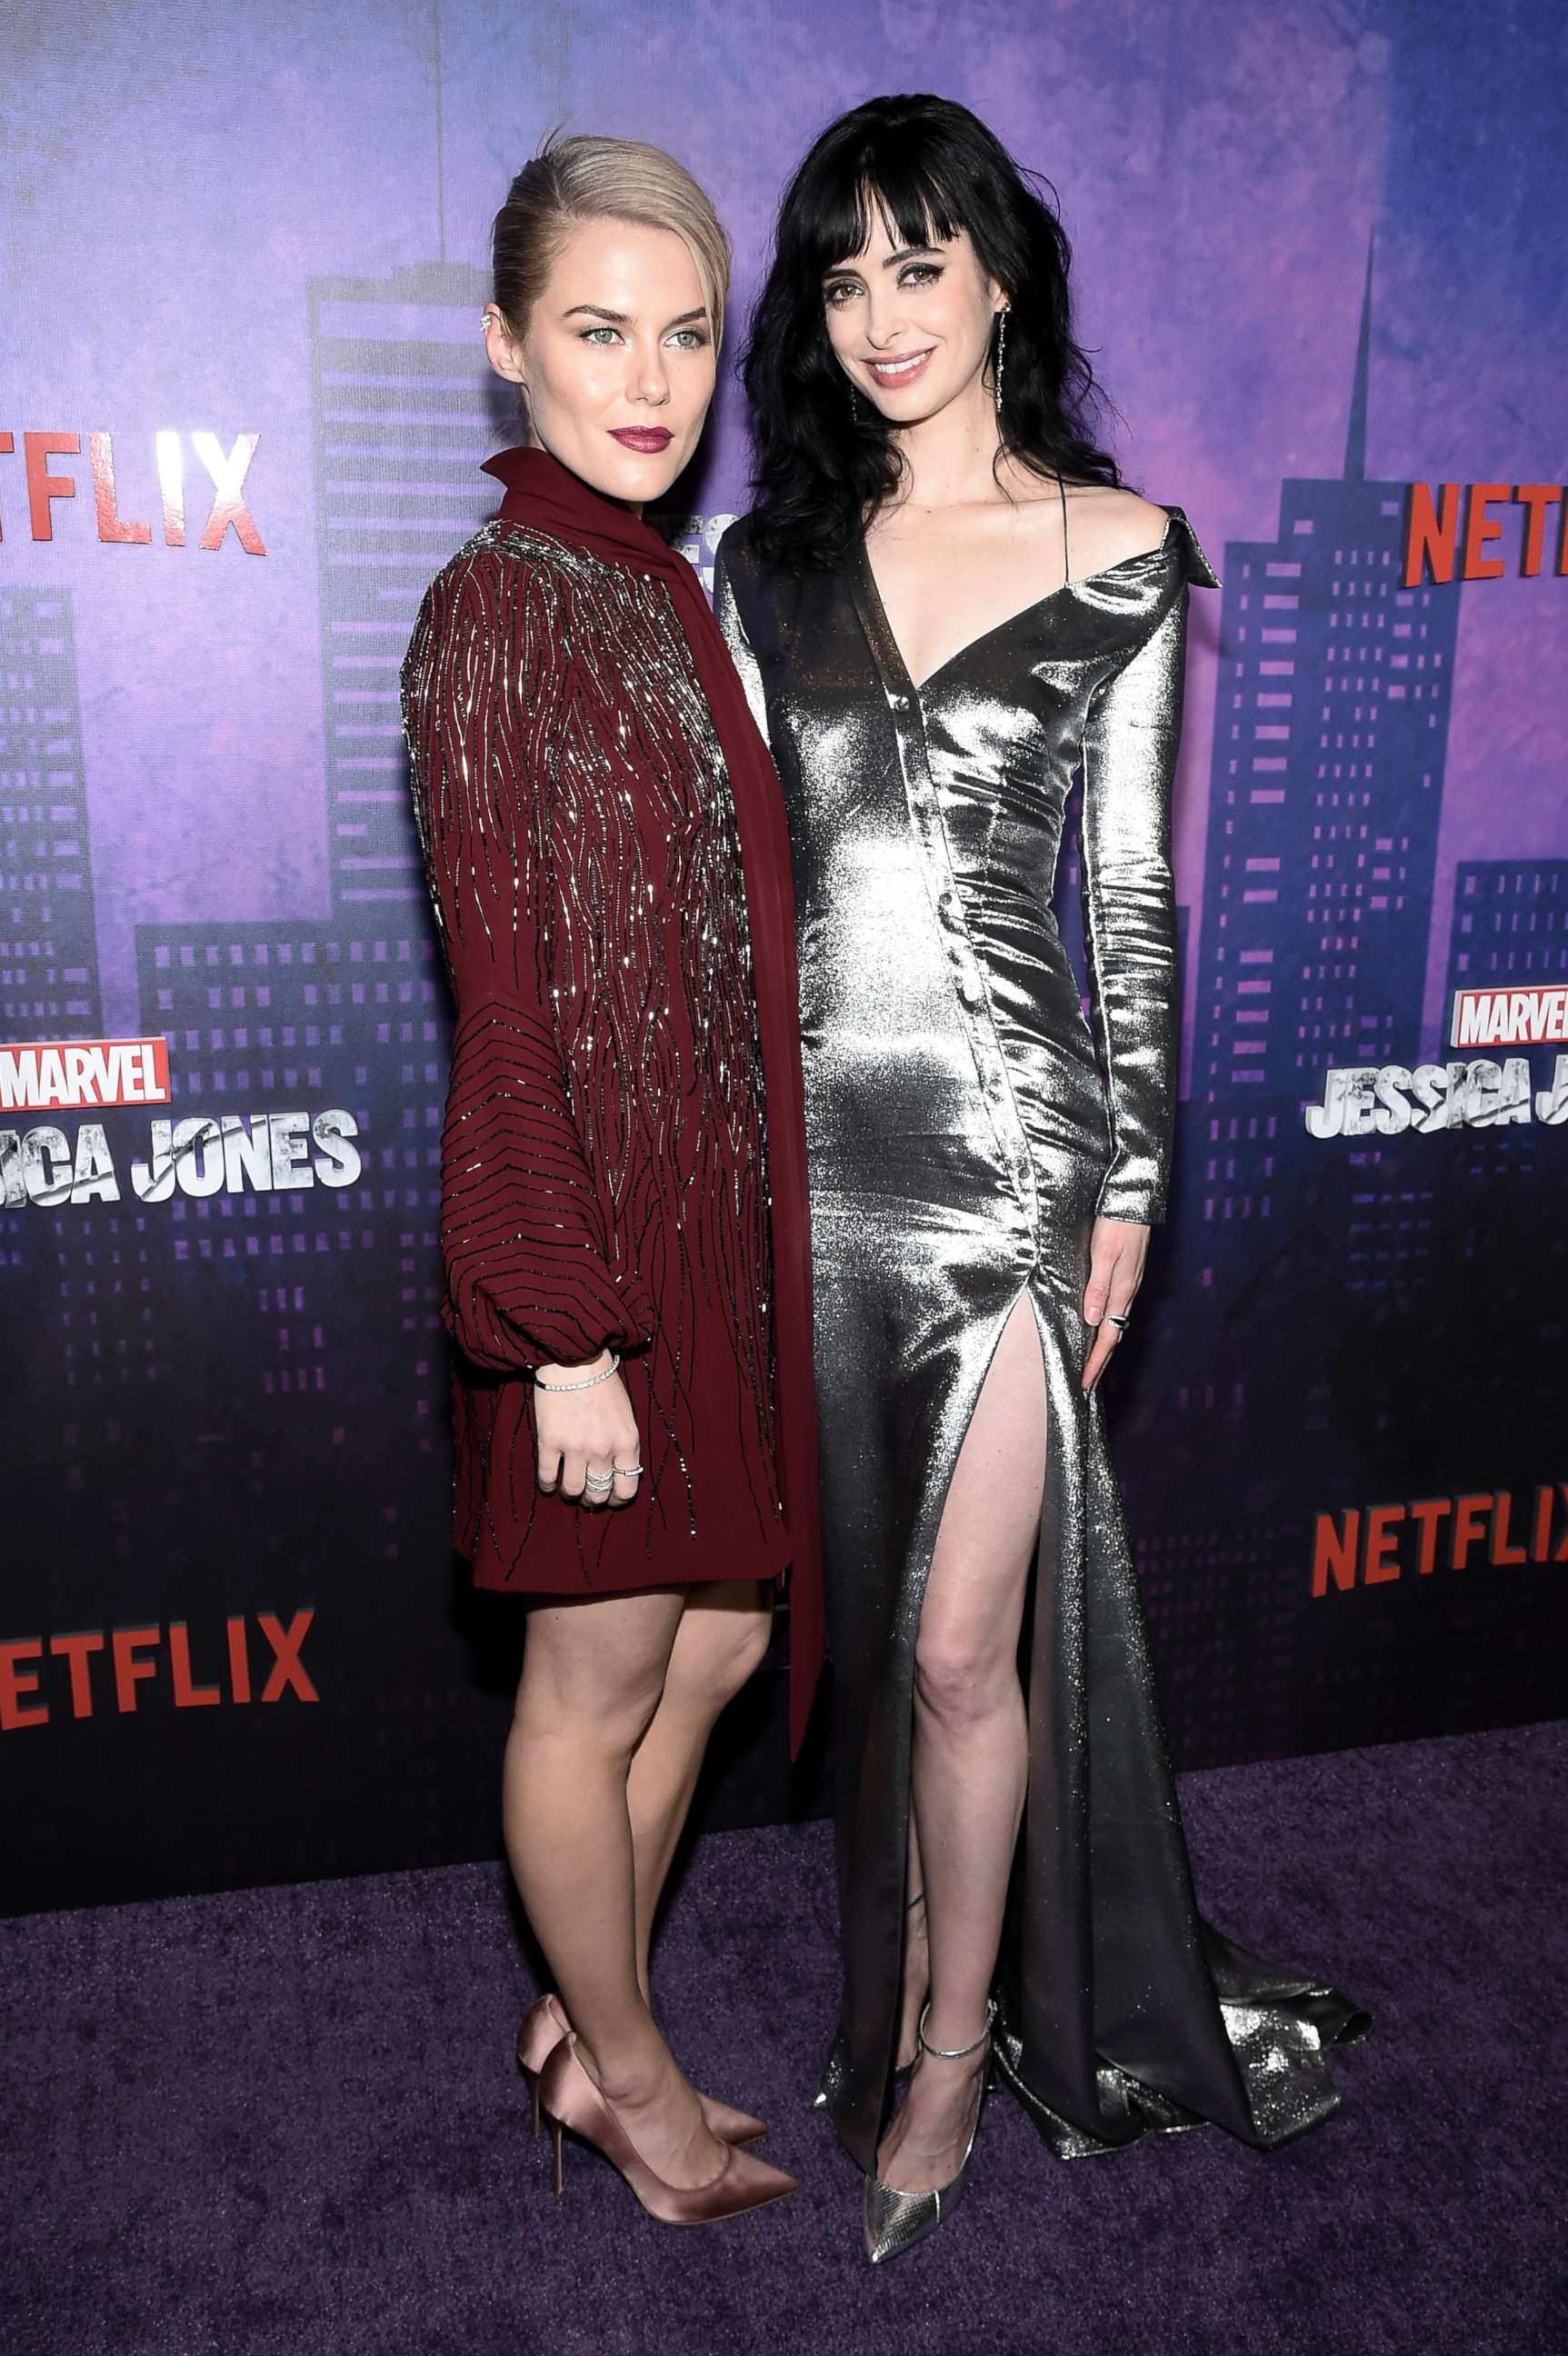 PHOTO: Rachael Taylor and Krysten Ritter attend "Jessica Jones" Season 2 New York Premiere at AMC Loews Lincoln Square, March 7, 2018 in New York City.